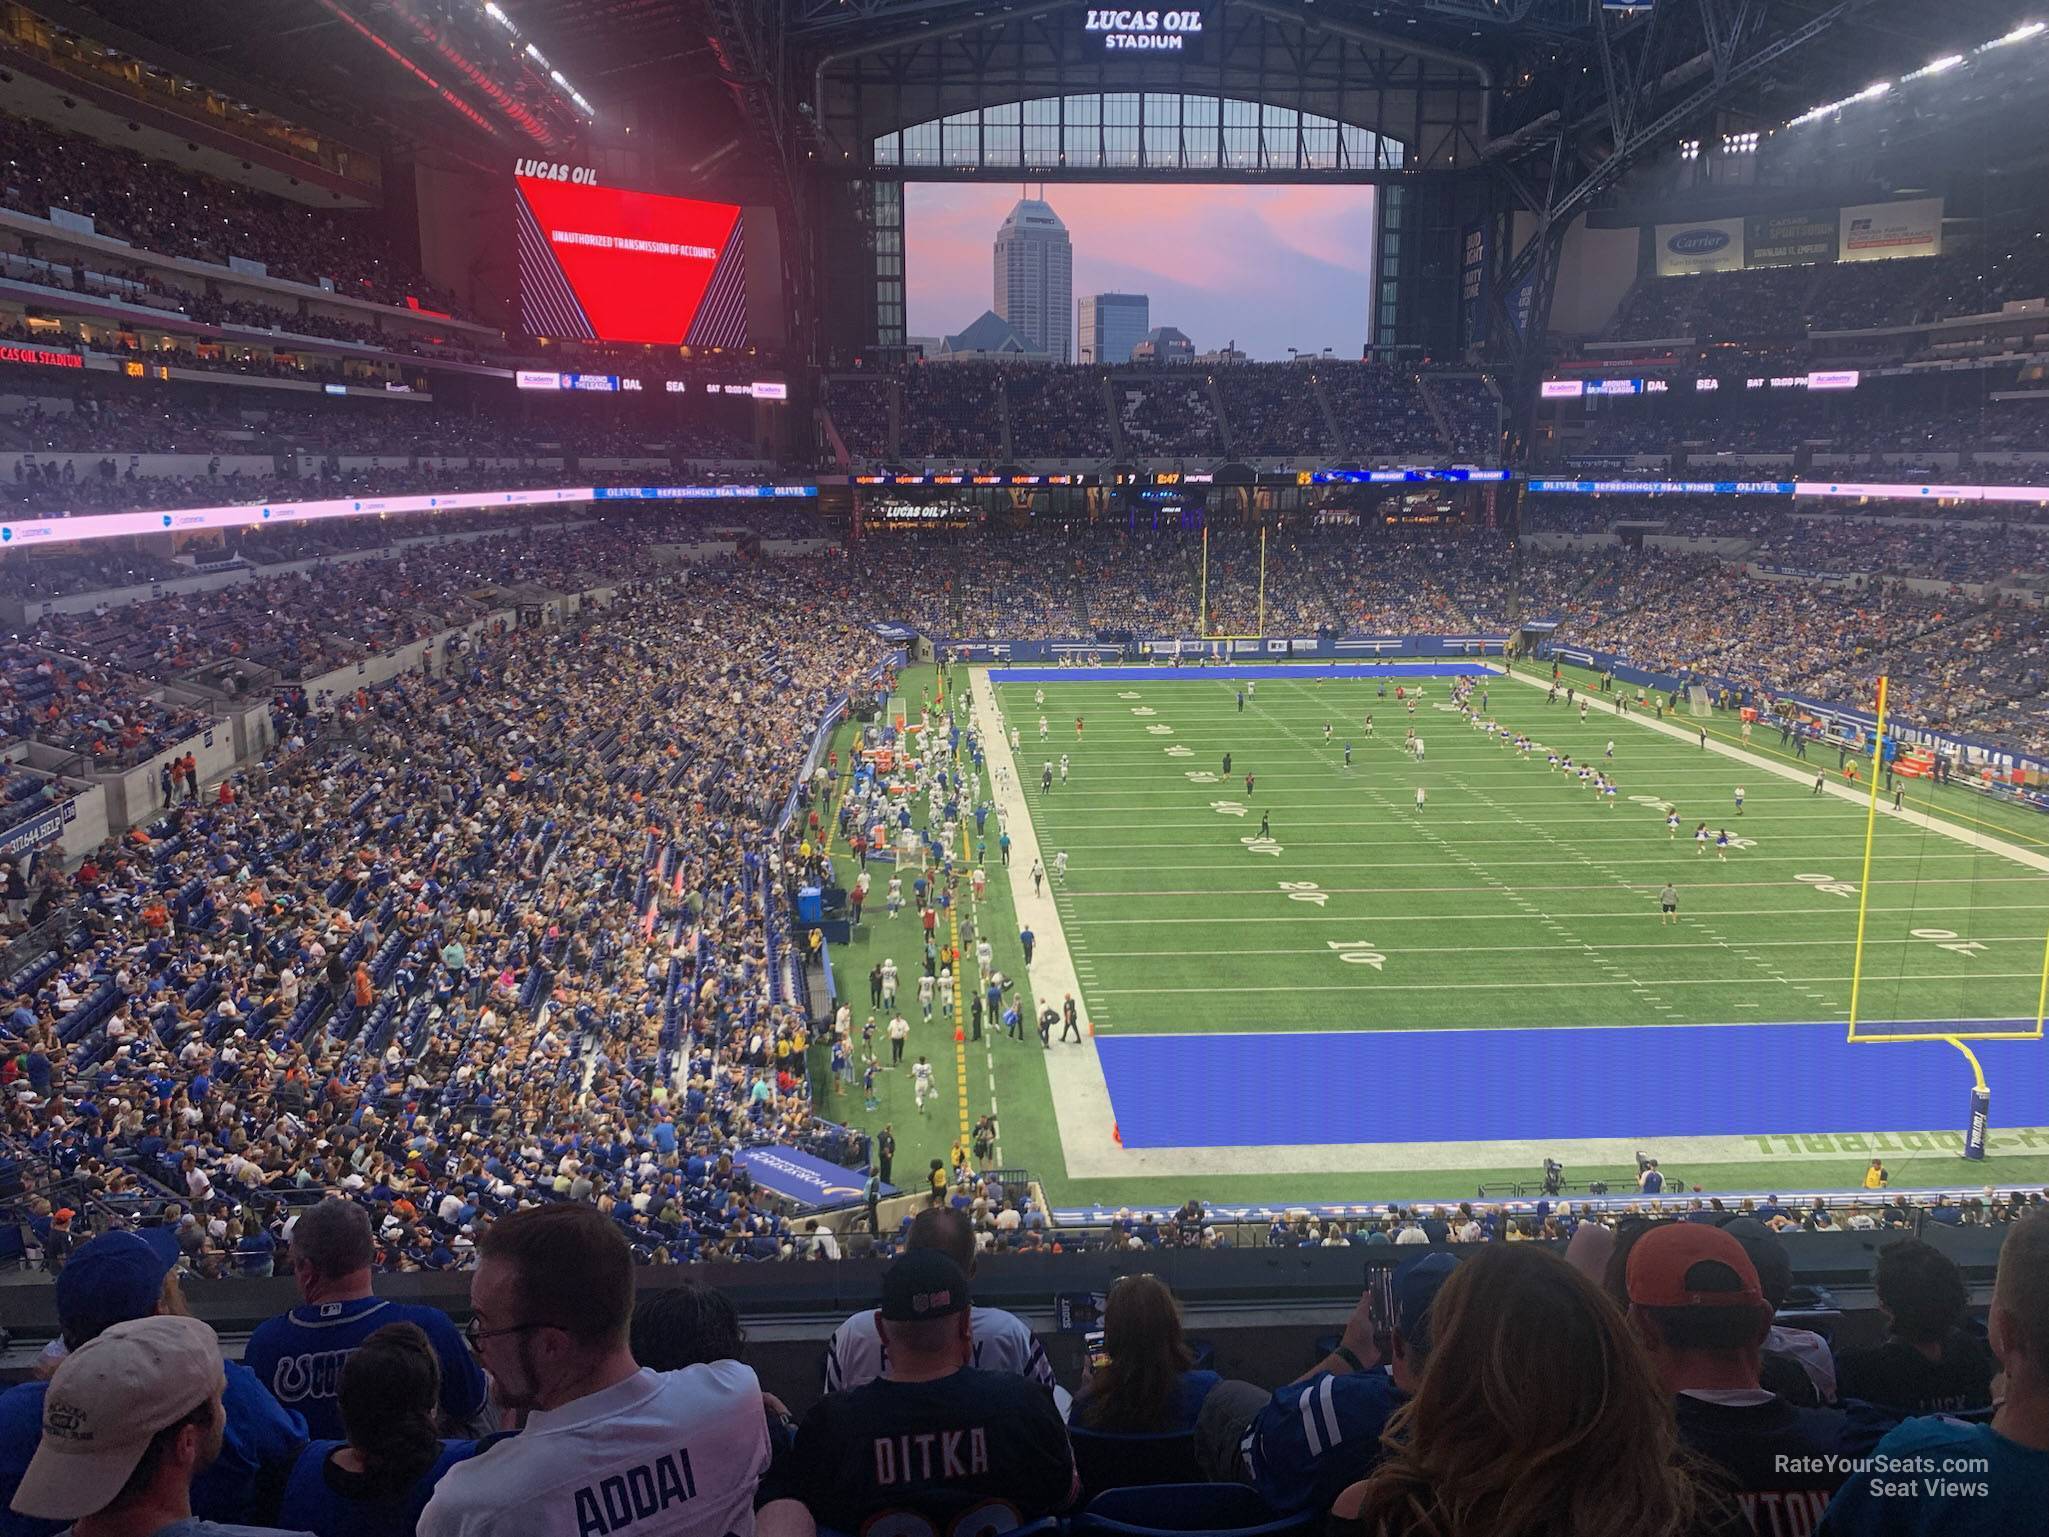 section 329, row 5n seat view  for football - lucas oil stadium